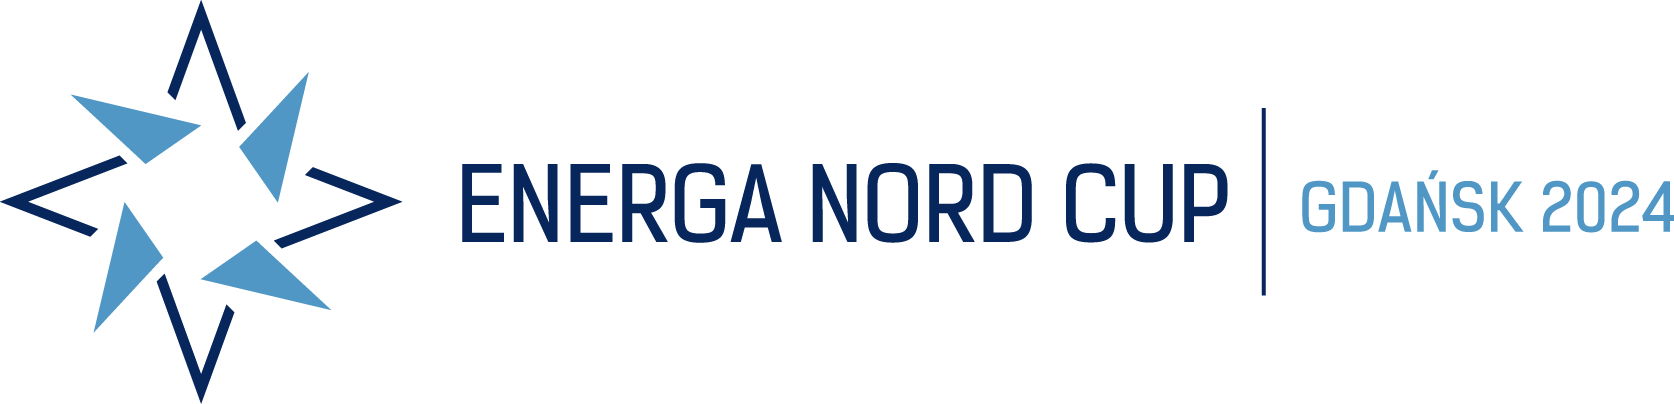 G:\7_Marketing\Nord CUP\2024\240325 NordCUP2024 logo\2024_nord_cup_energa_pozioma\2024_nord_cup_energa_poziom.png